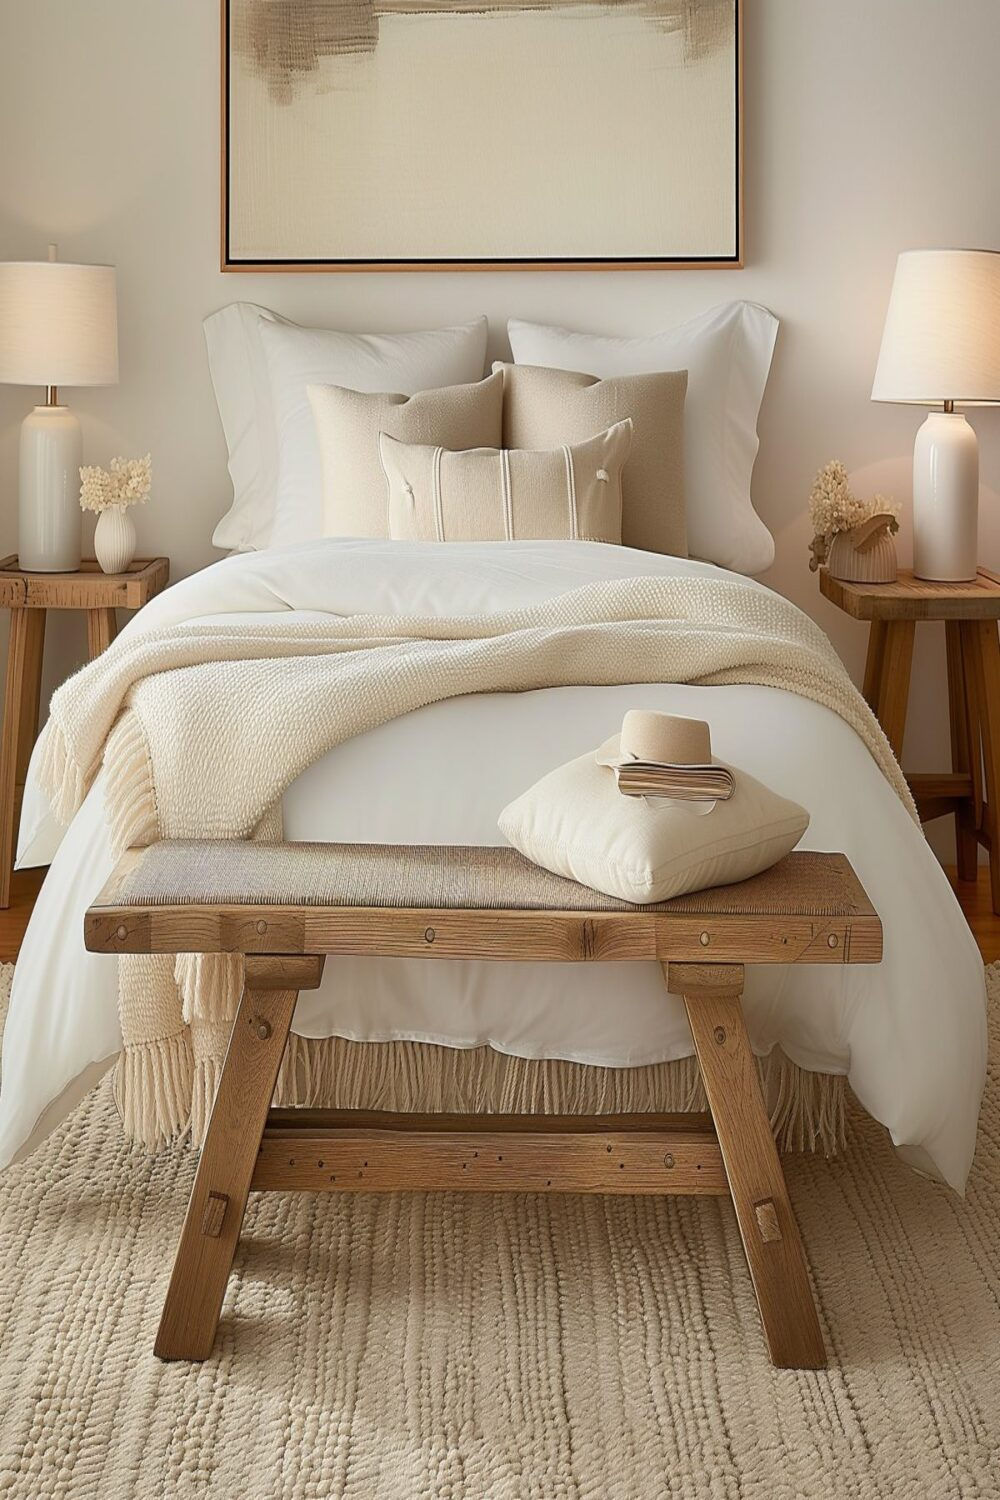 The Timeless Elegance of Real Wood Bedroom Furniture: Why It’s Worth the Investment